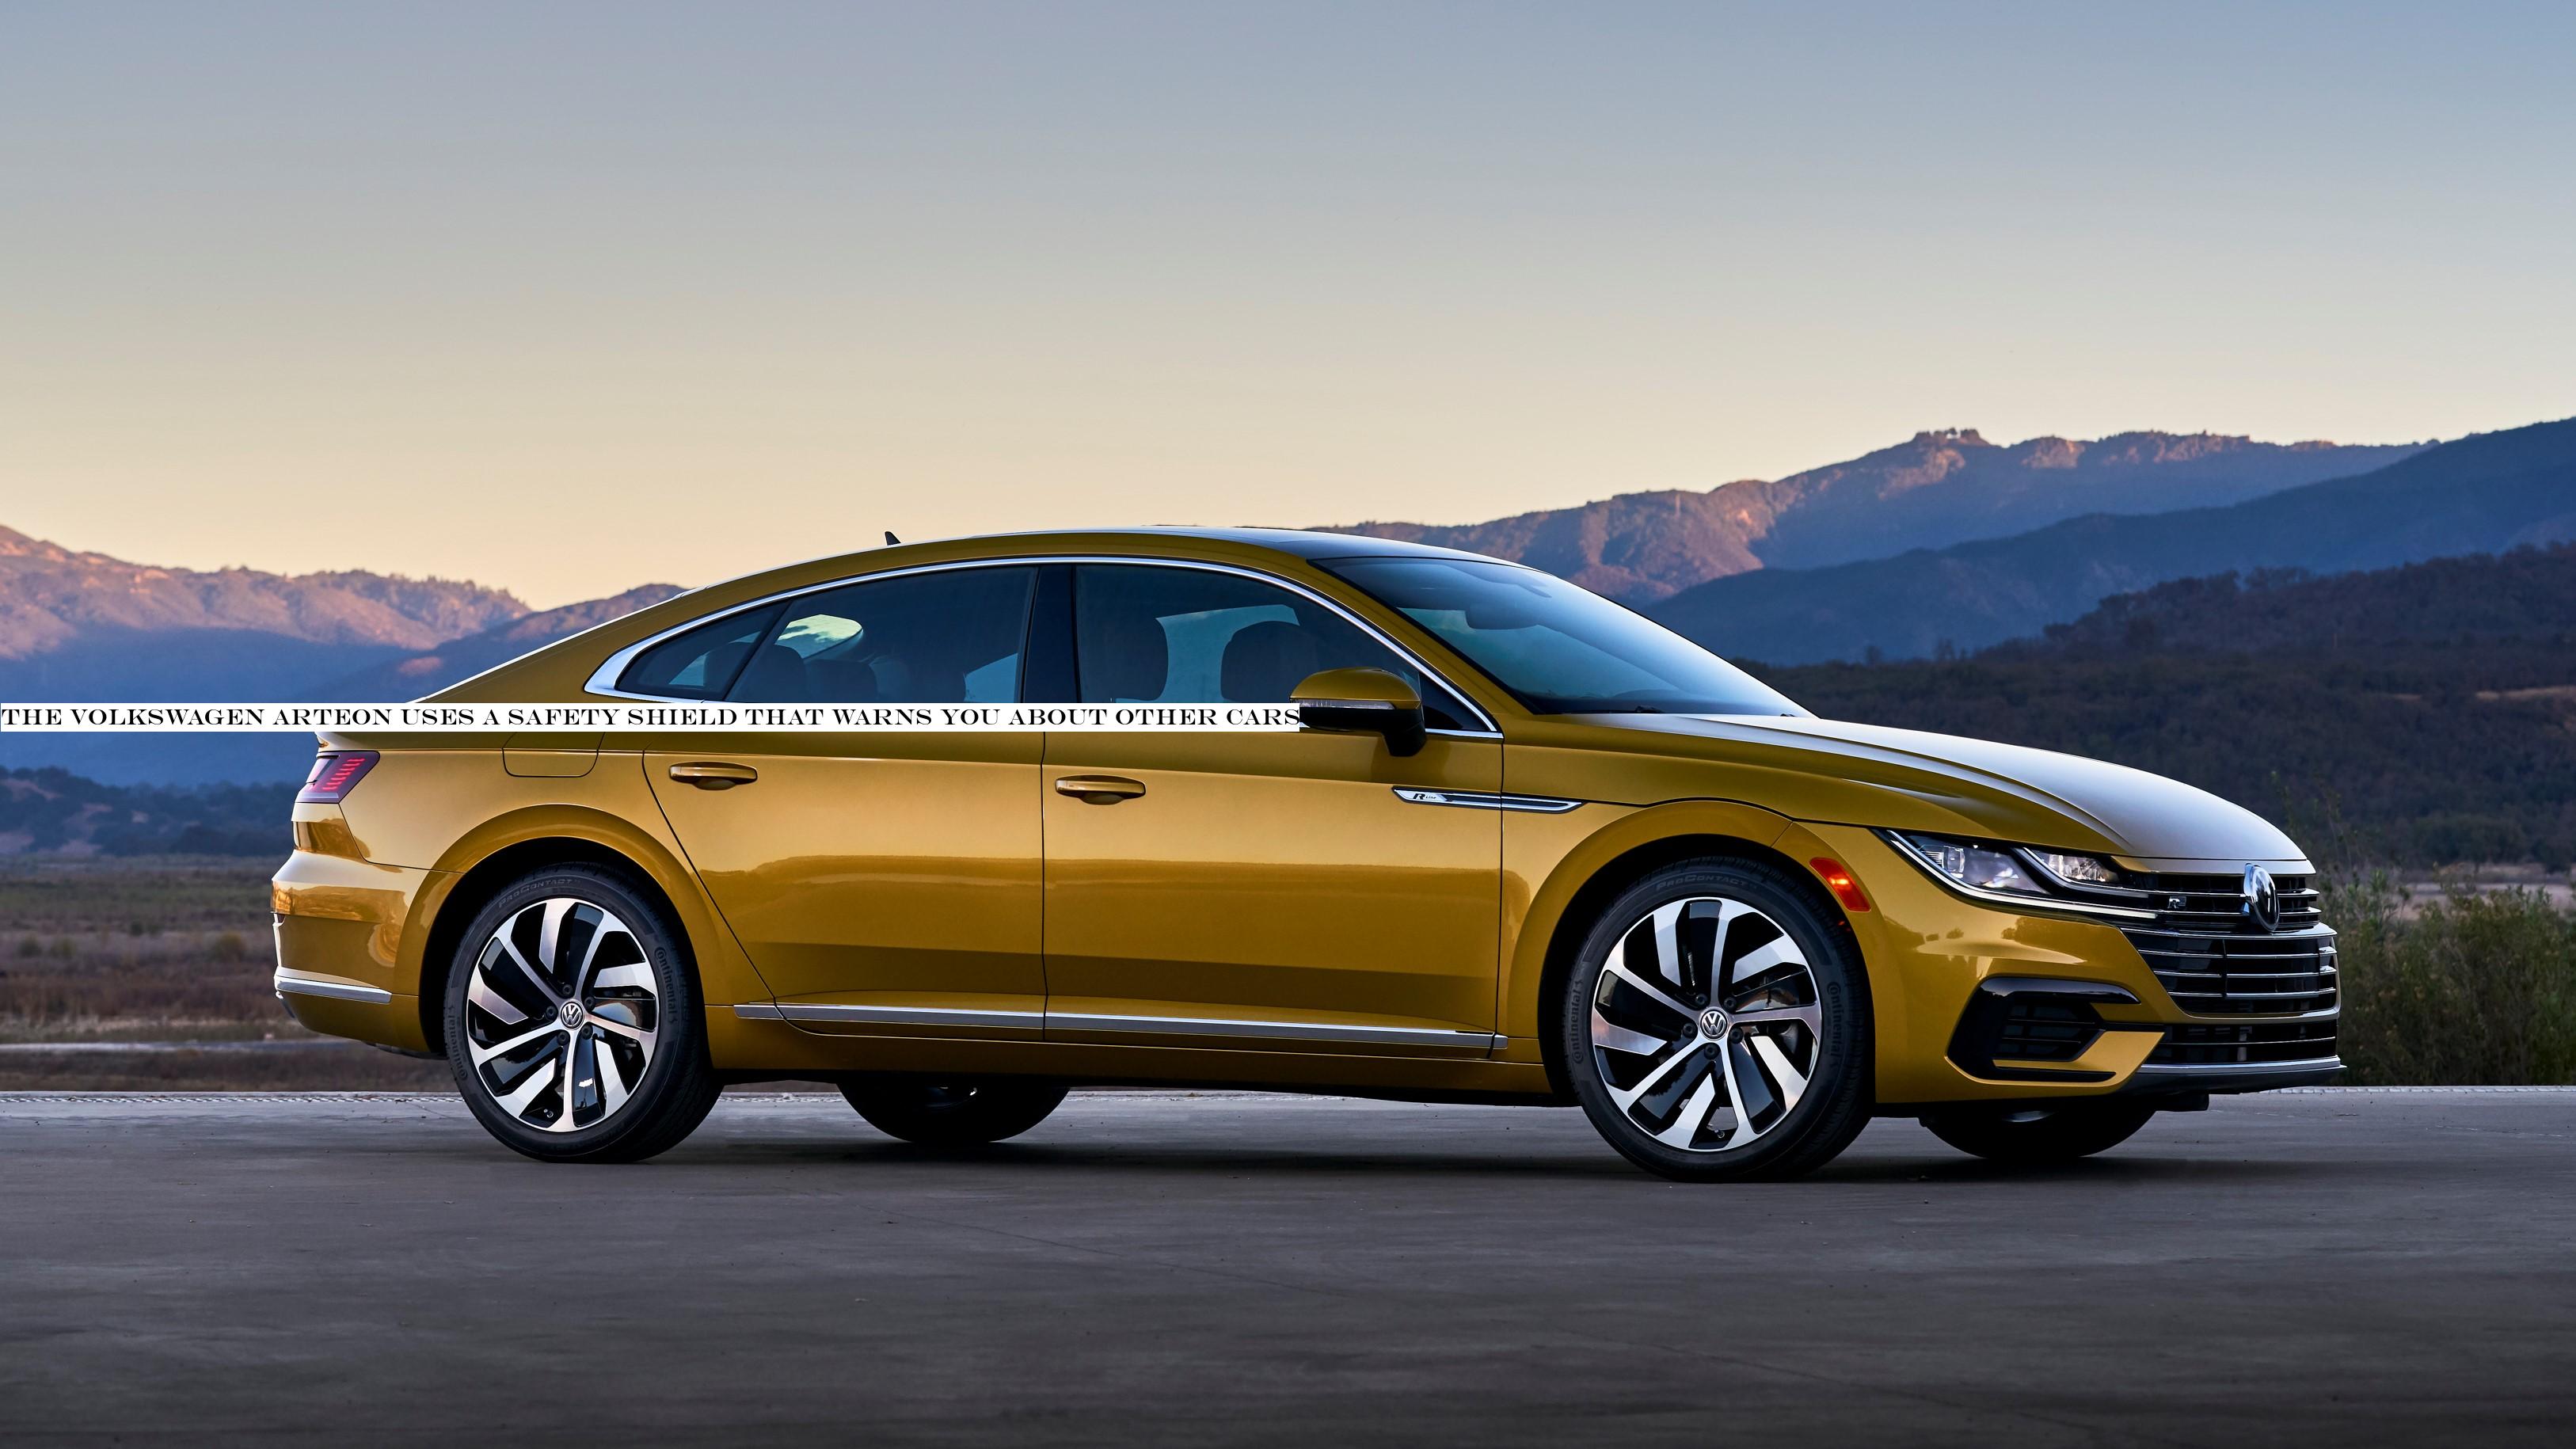 The Volkswagen Arteon uses a safety shield that warns you about other cars